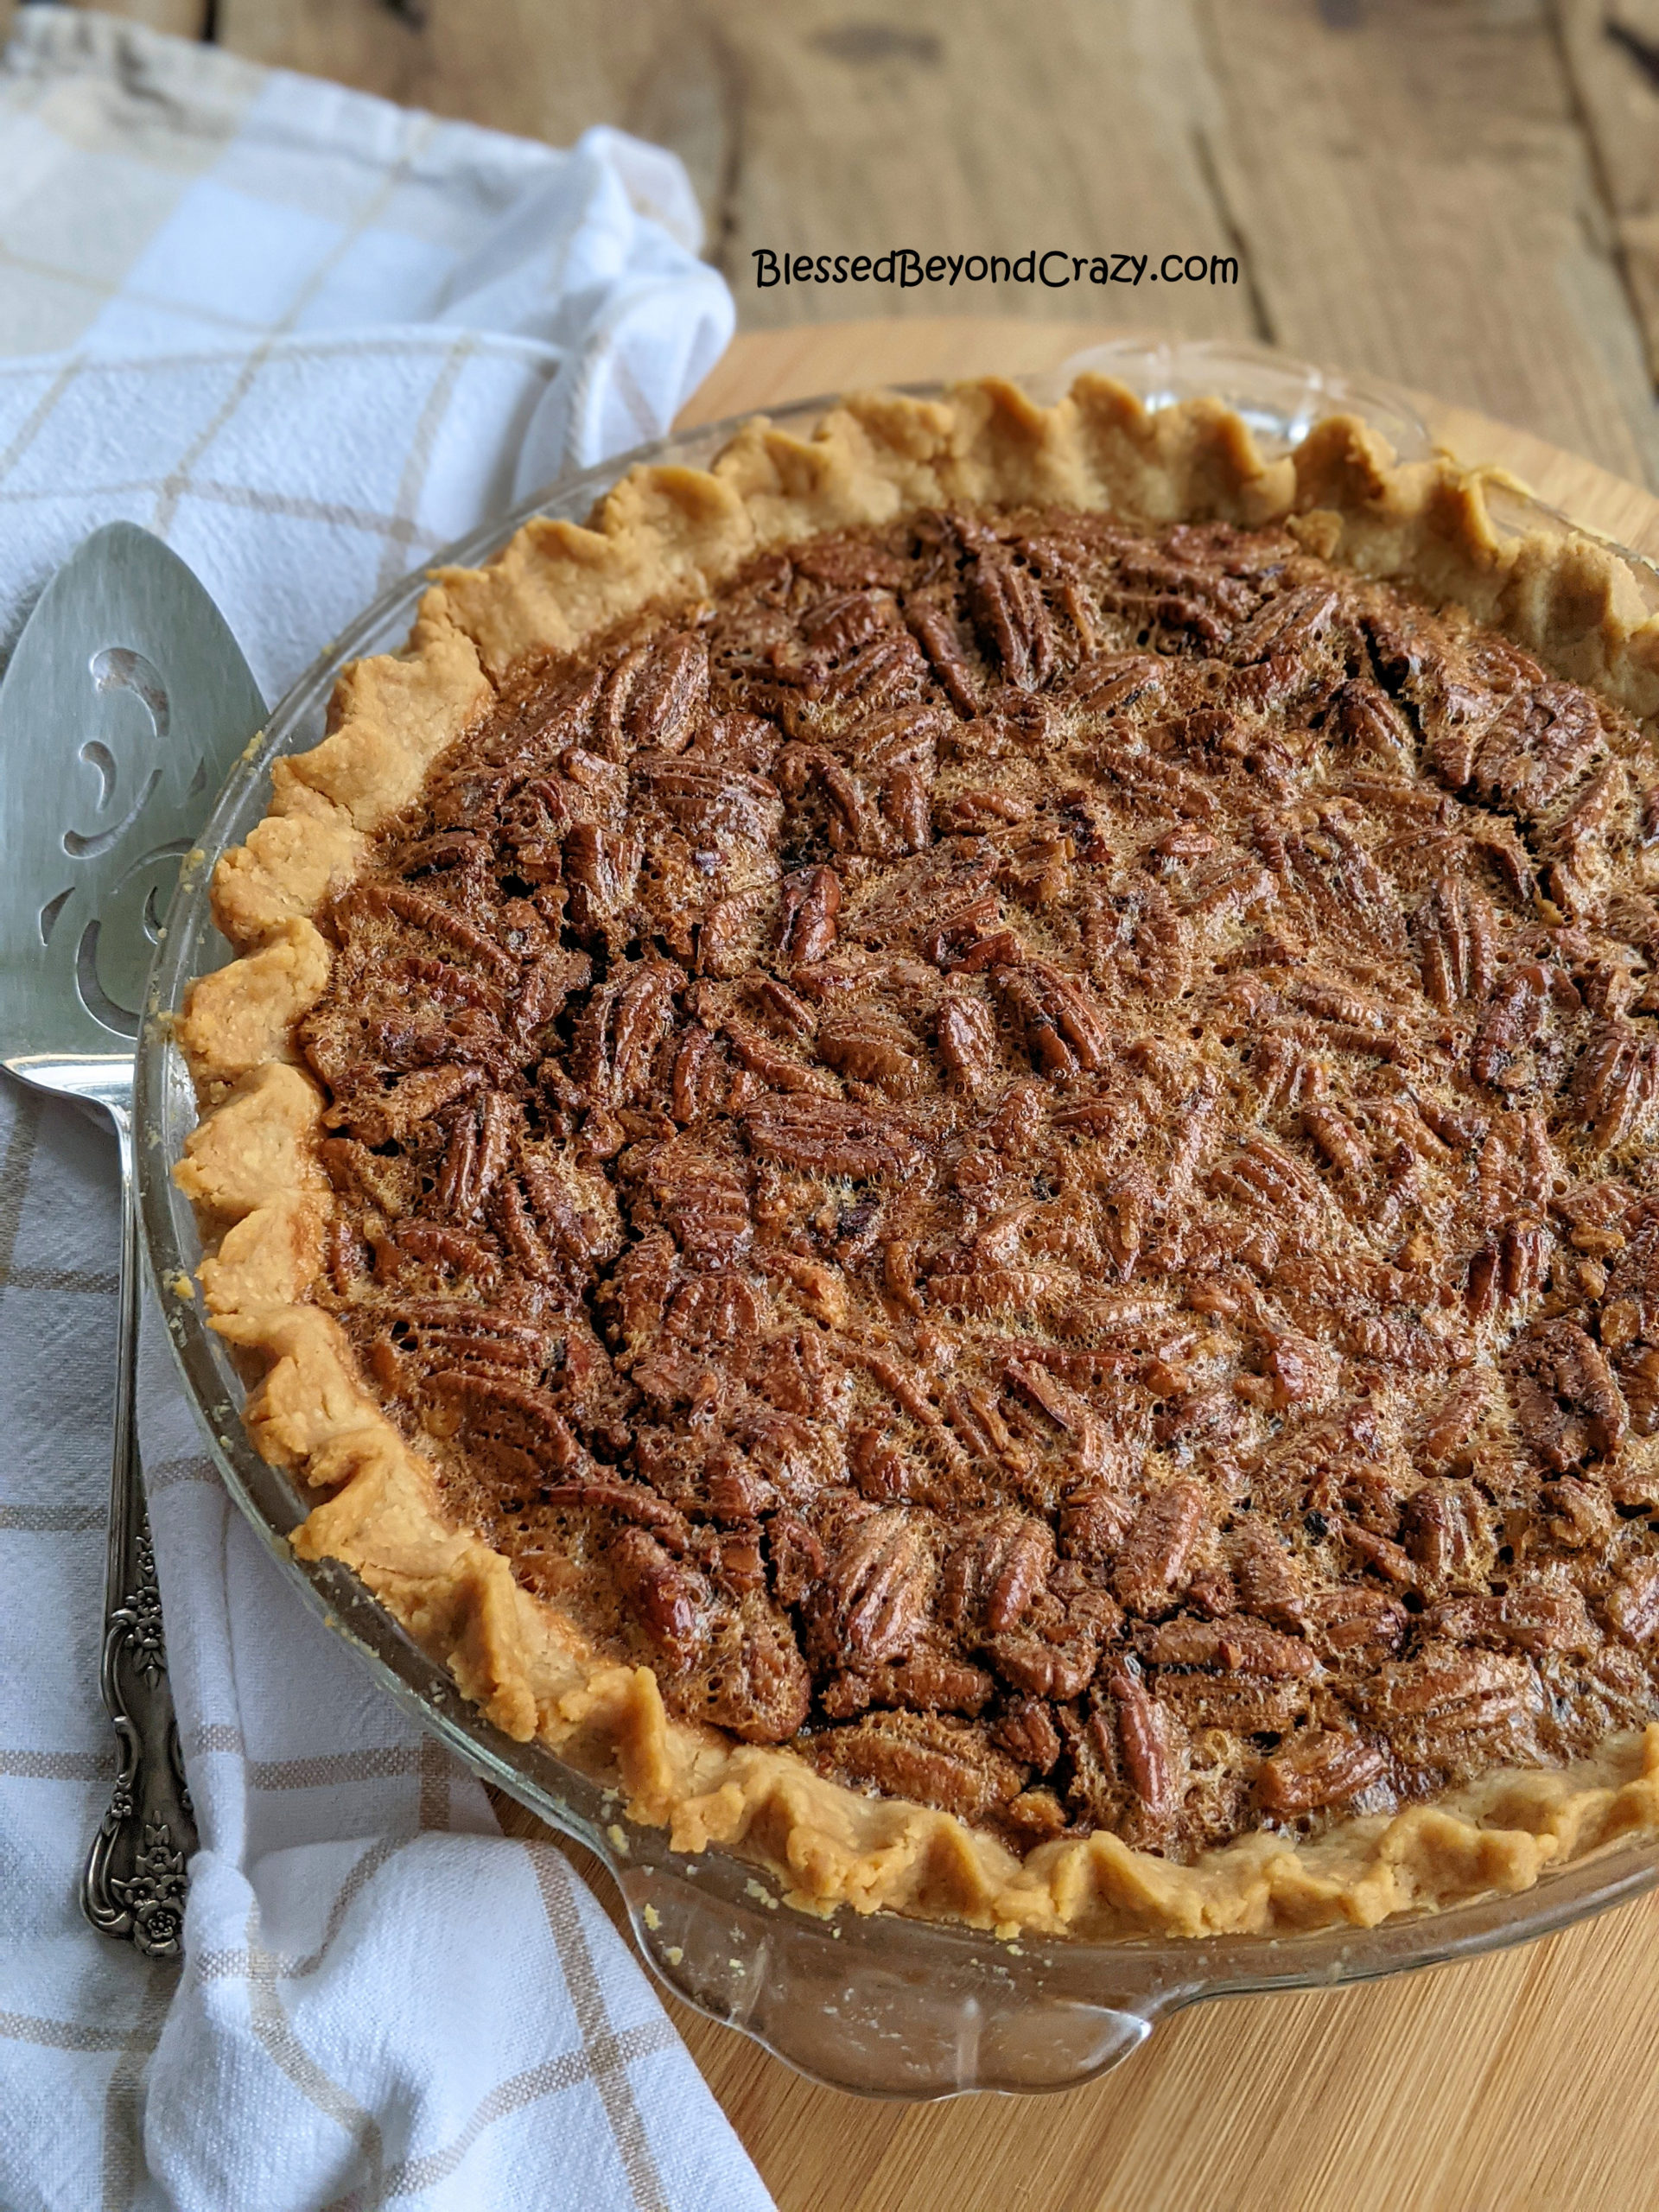 How to Make a Southern Pecan Pie - Blessed Beyond Crazy